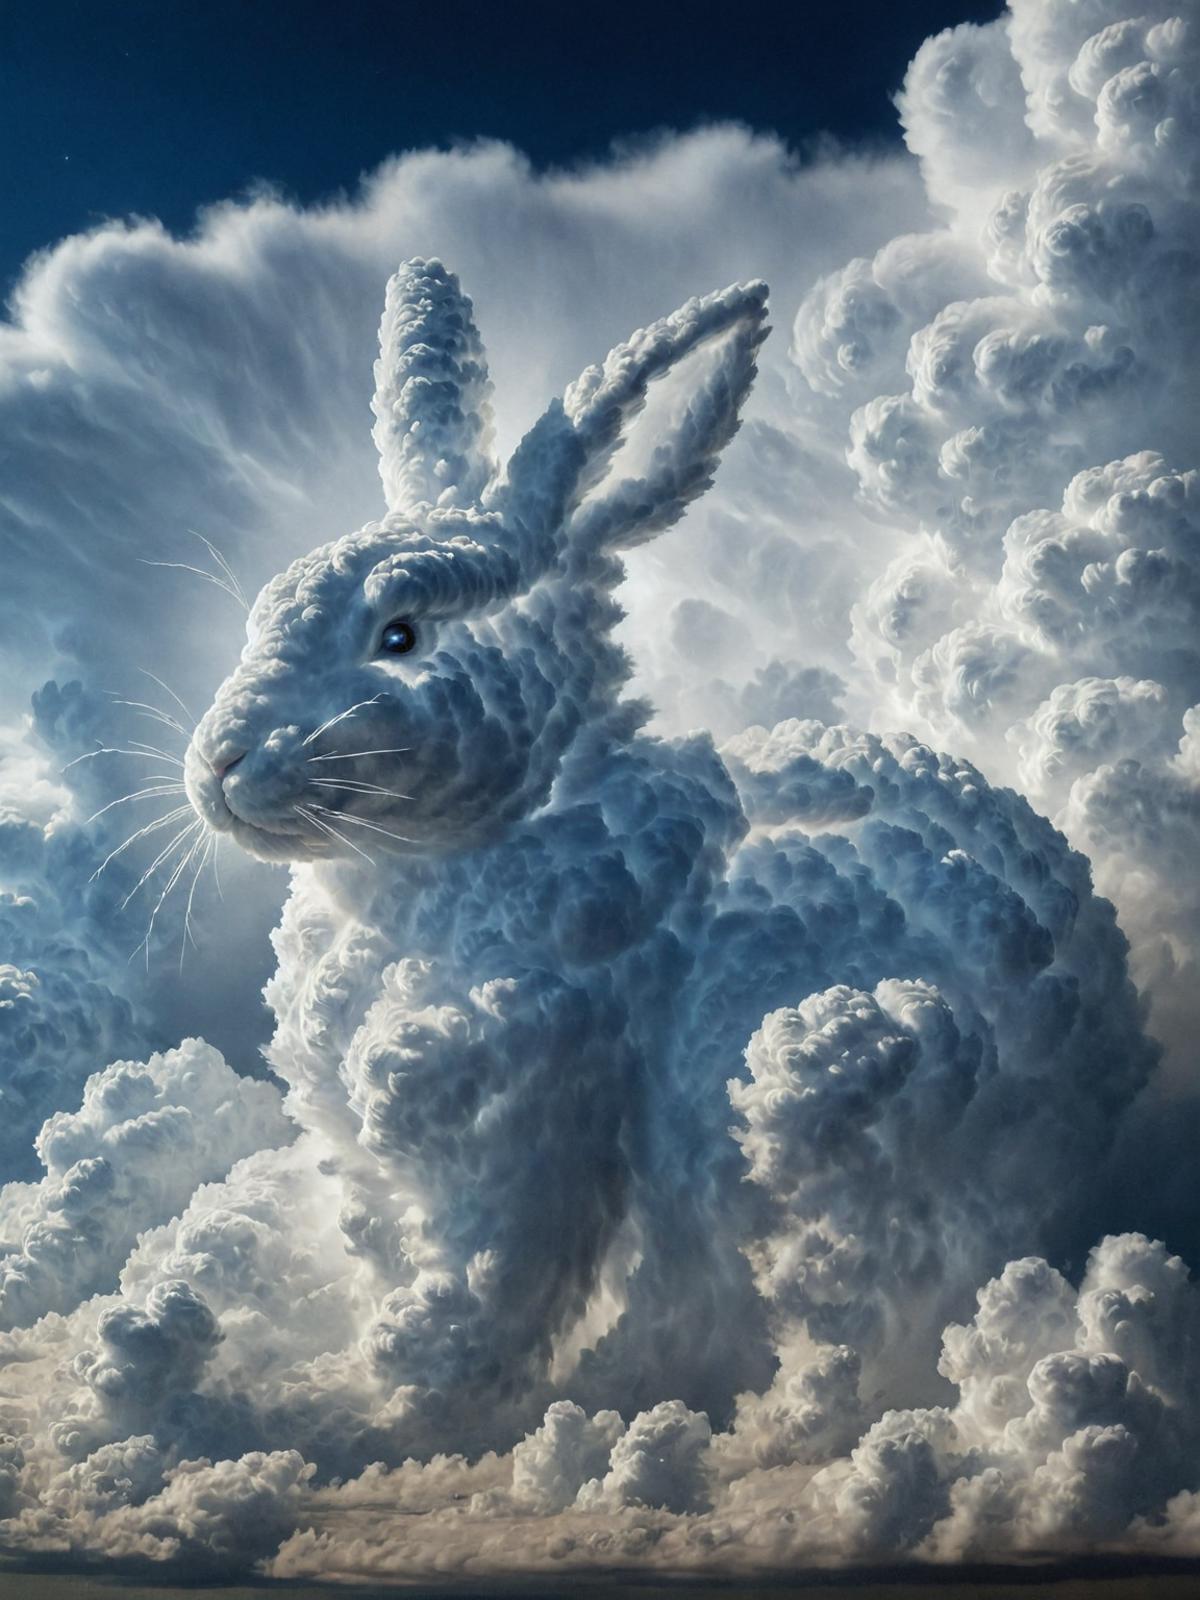 A white rabbit with blue eyes standing in front of a cloudy sky.